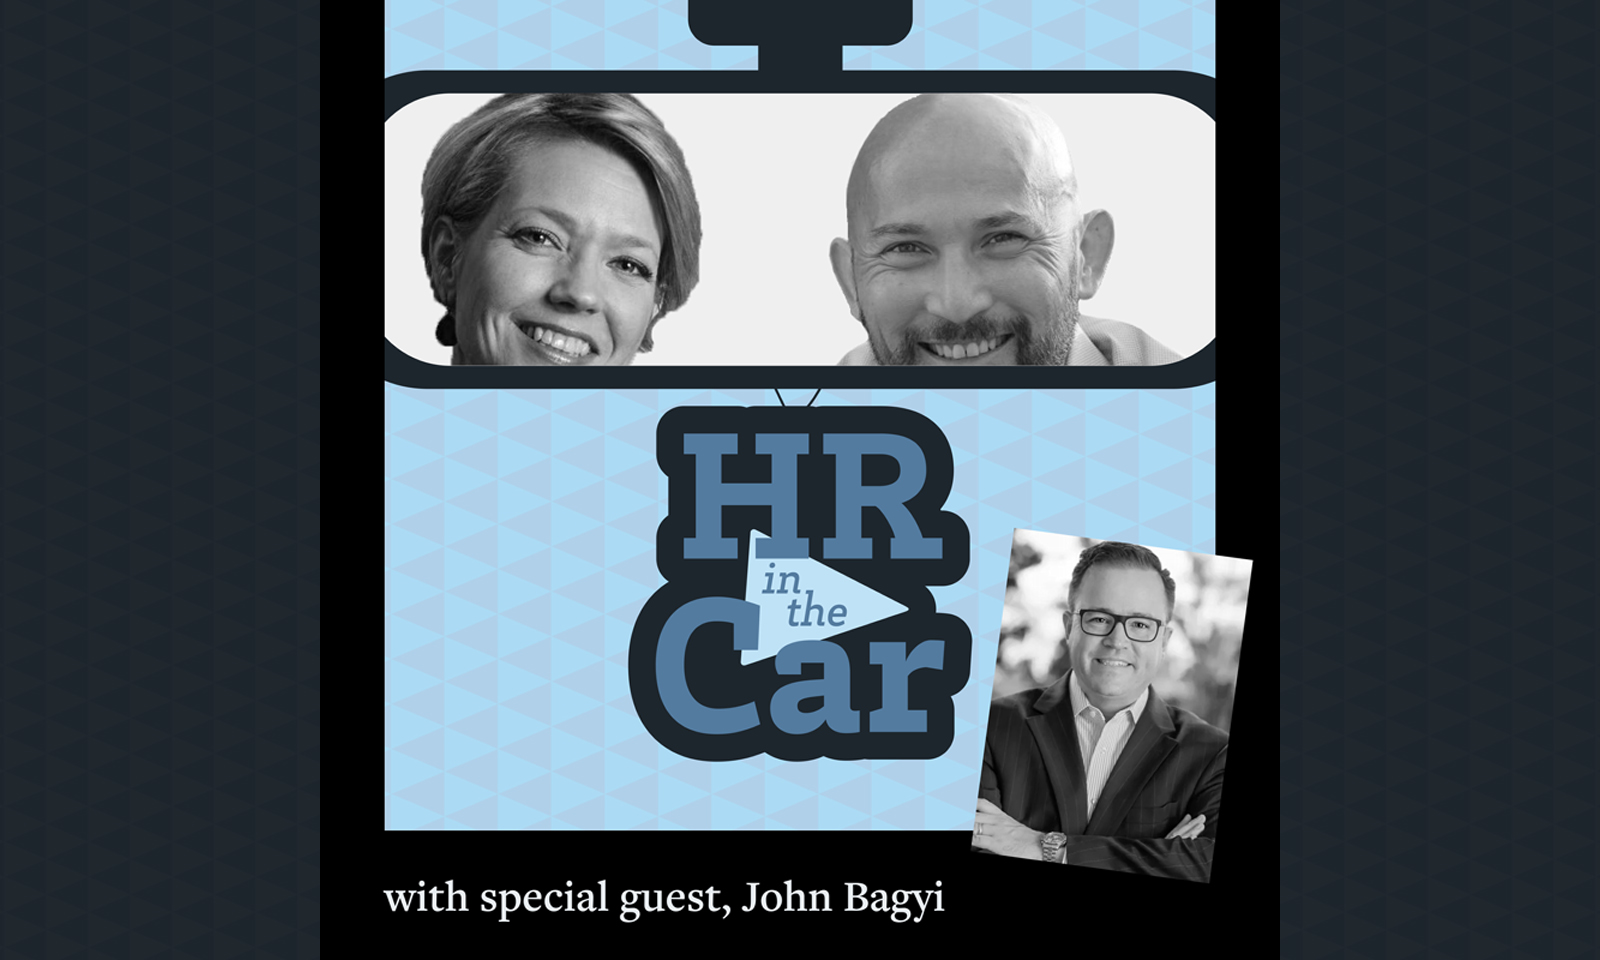 HR in the Car - Episode 2: "The Incomparable John Bagyi"